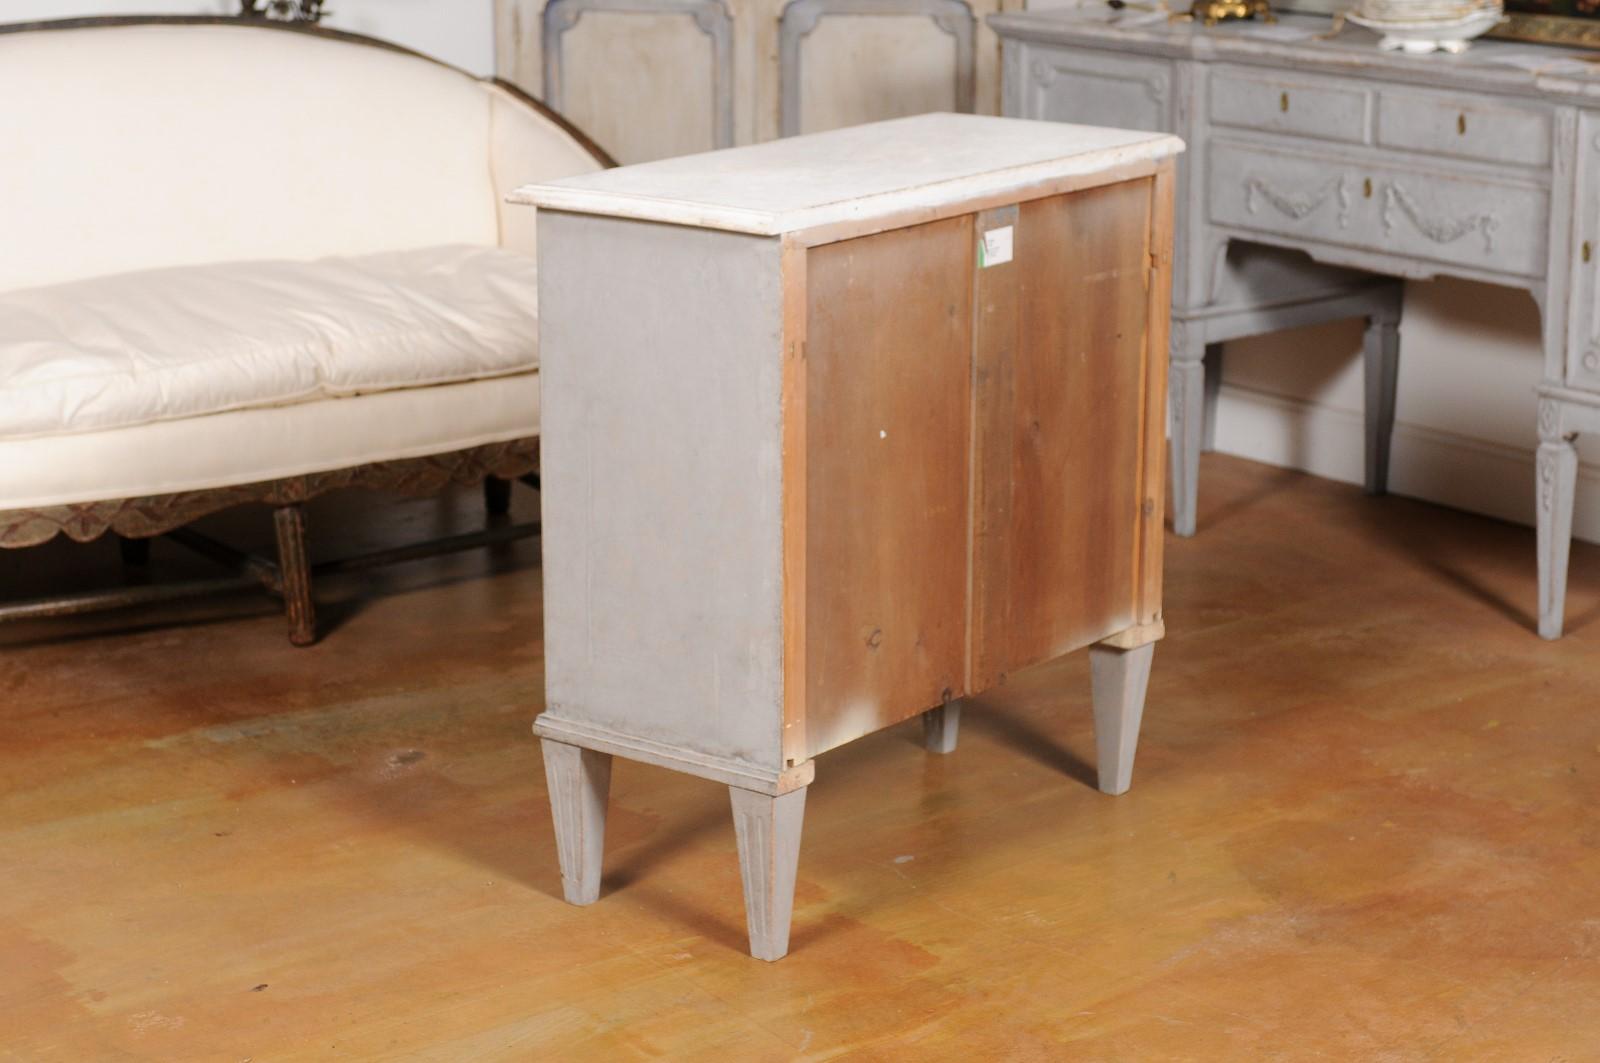 A Swedish Gustavian style painted wood sideboard from the 19th century, with reeded and fluted motifs. Created in Sweden during the 19th century, this Gustavian style sideboard features a rectangular top with beveled edges, sitting above a single